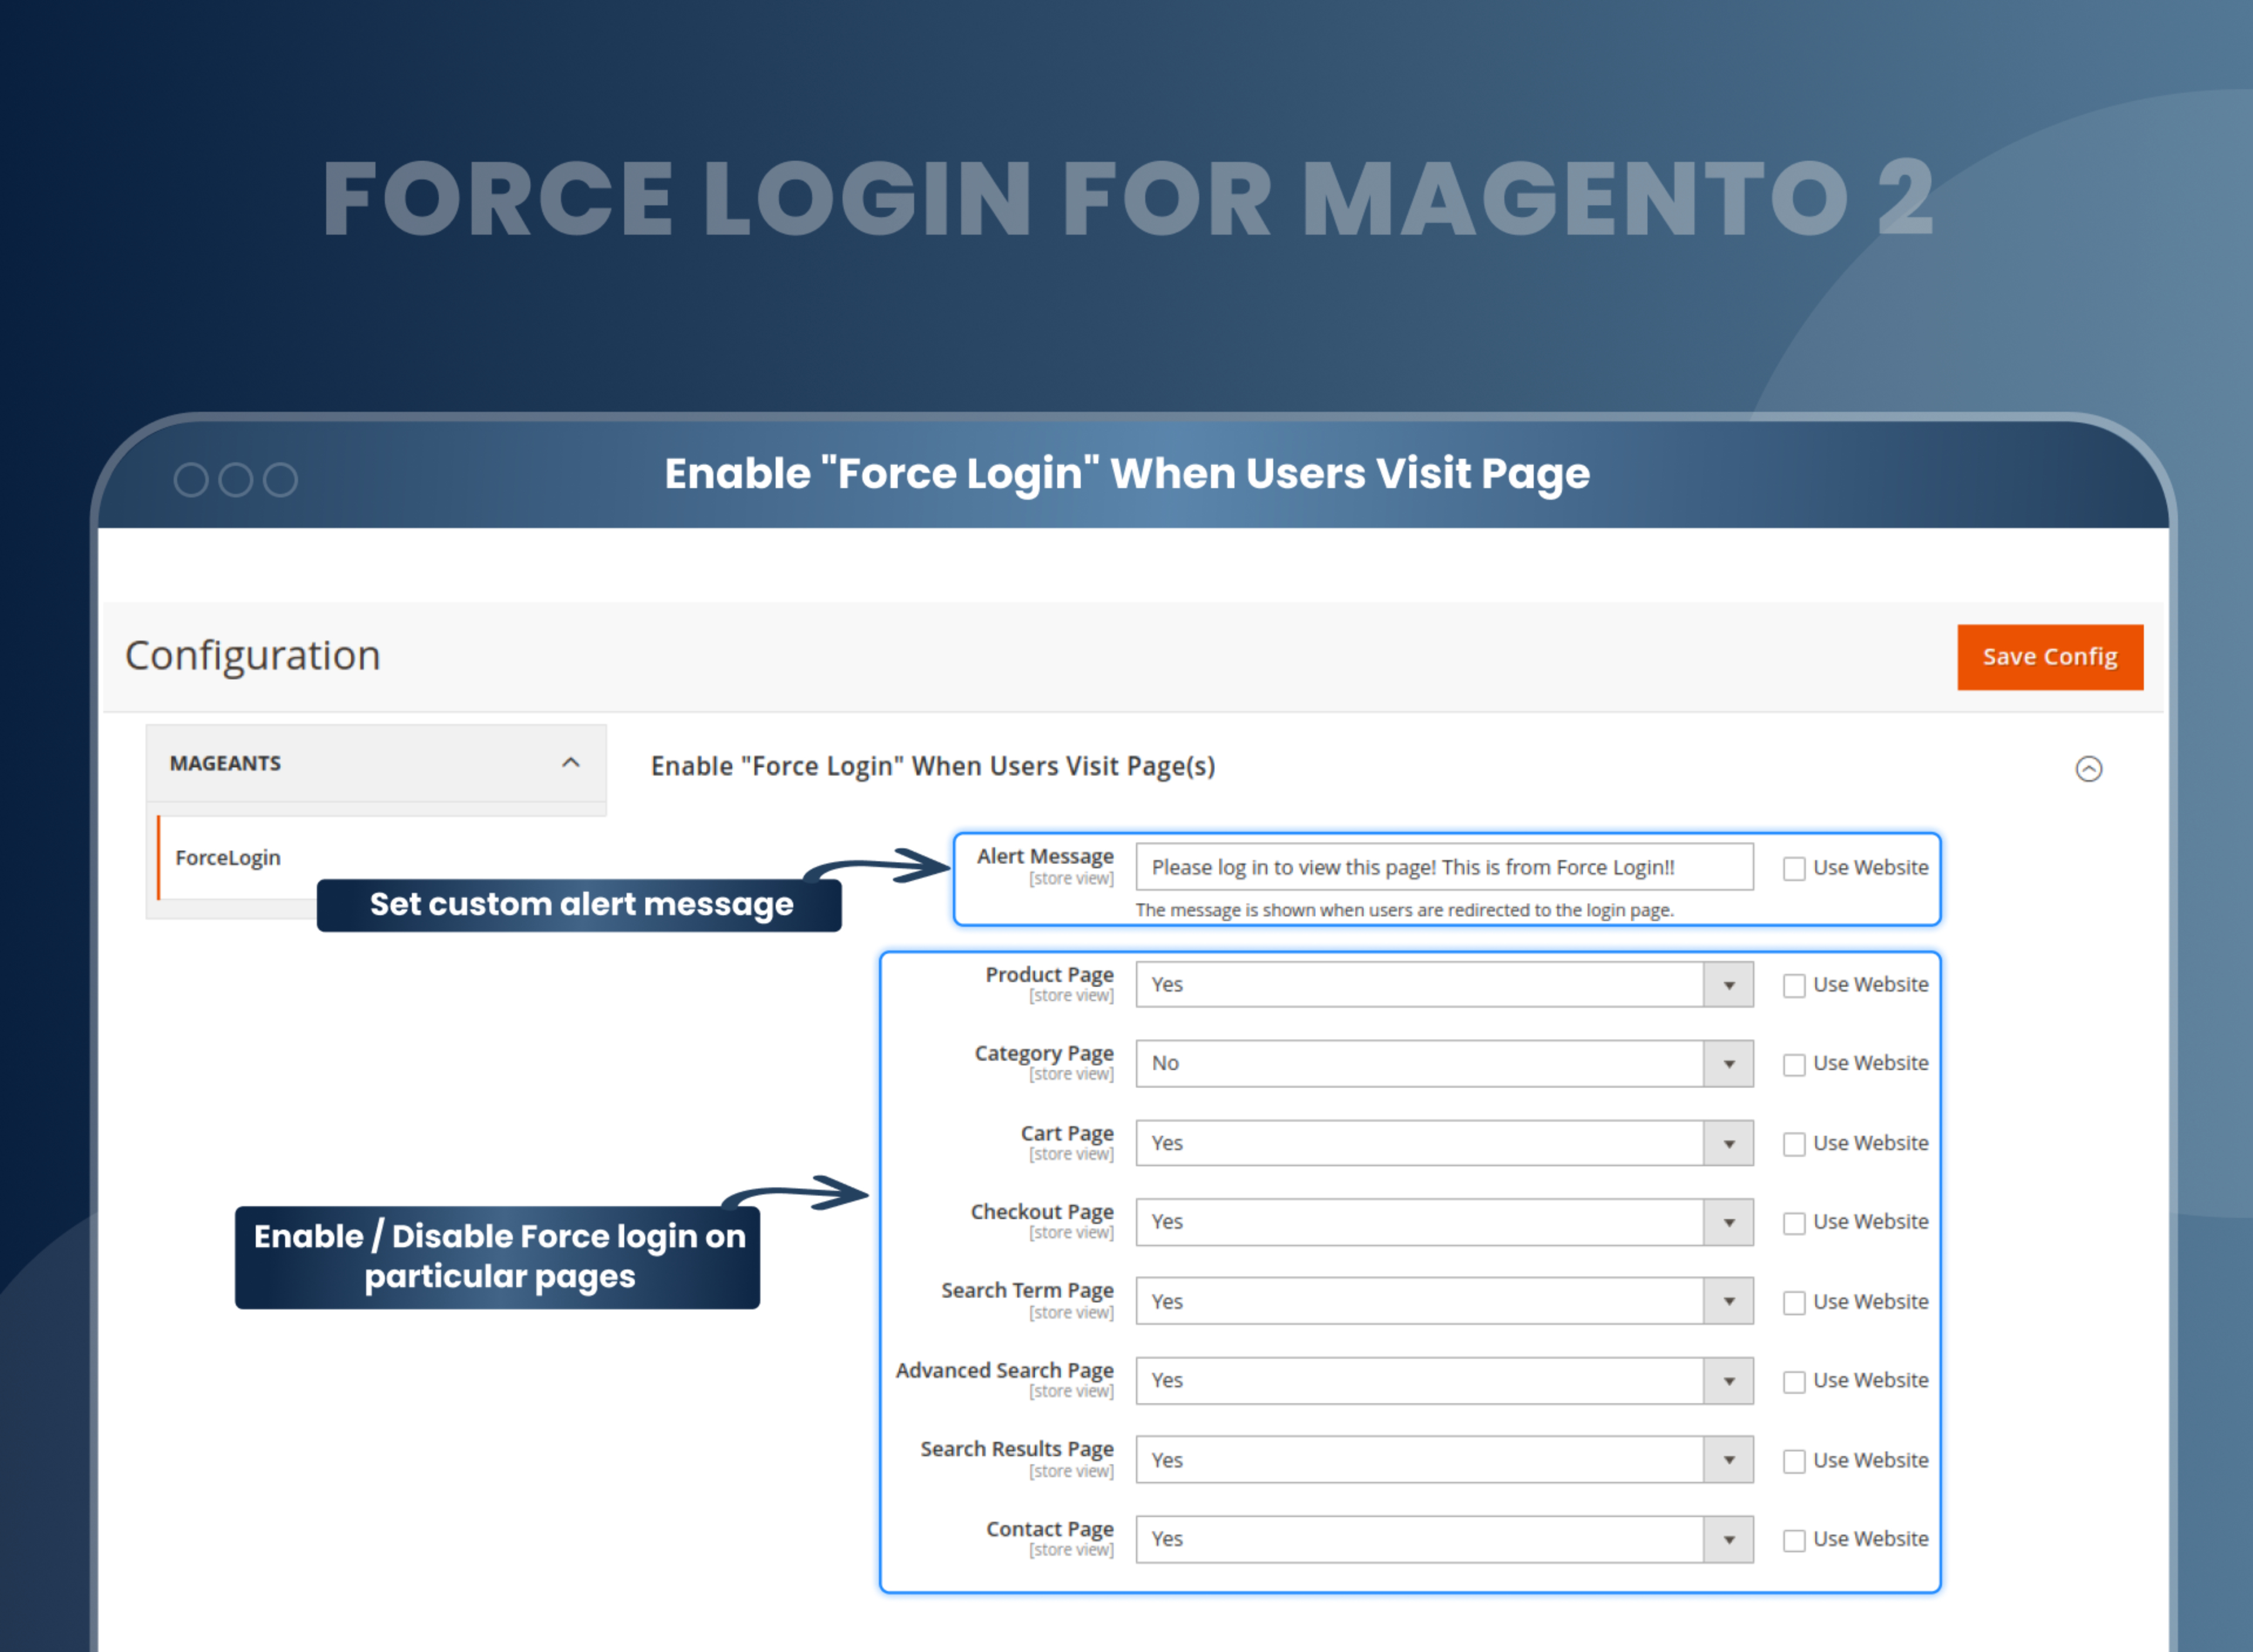 Enable 'Force Login' When Users Visit Page